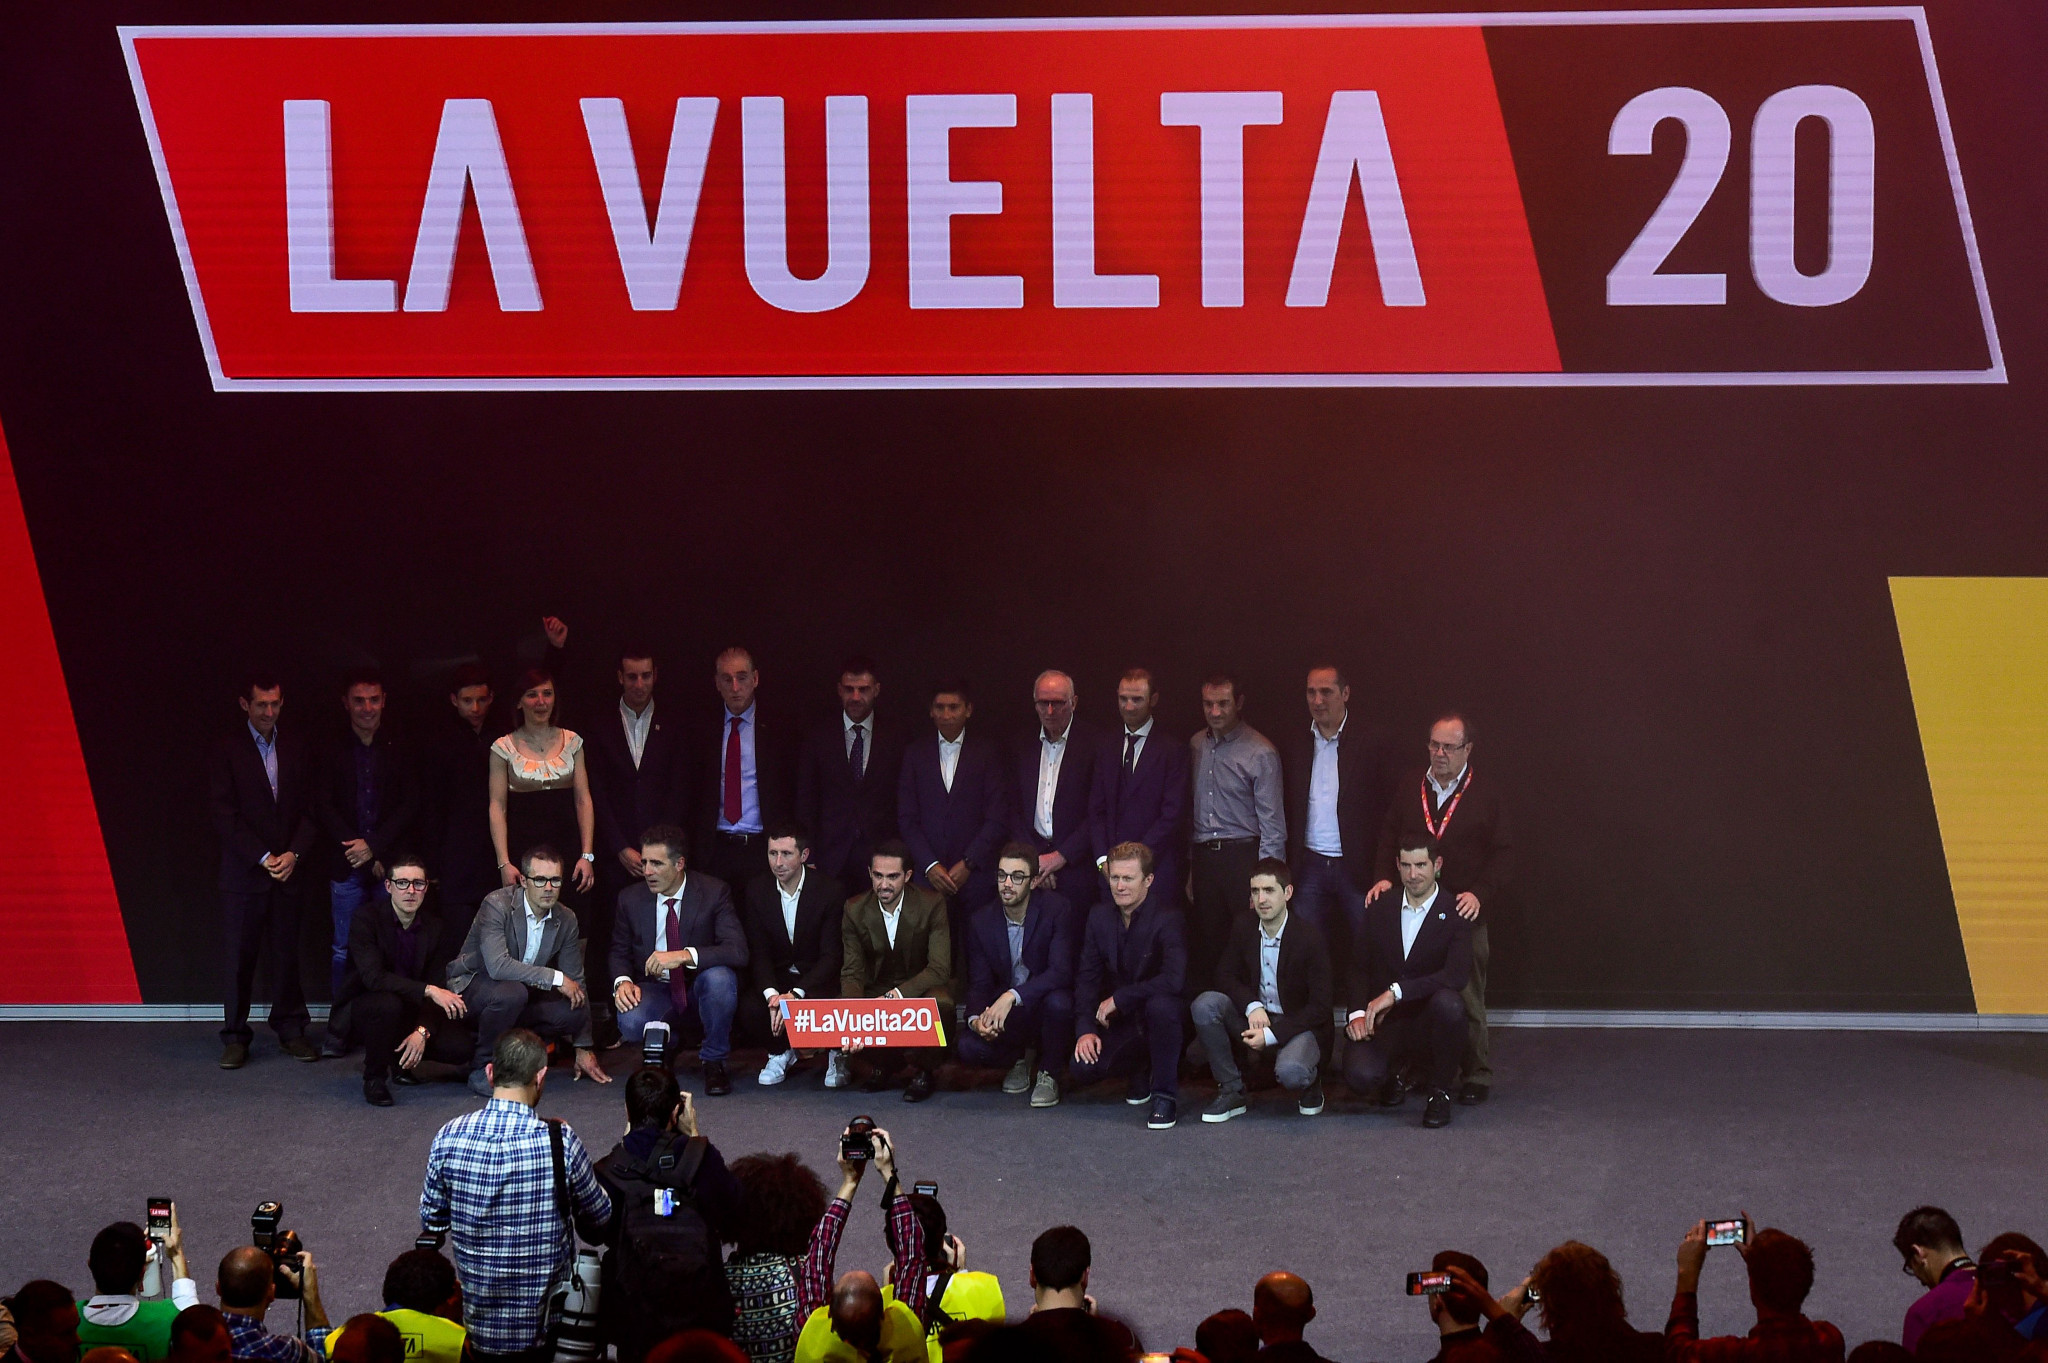 Organisers have confirmed the 22 teams for this year's Vuelta a España ©Getty Images